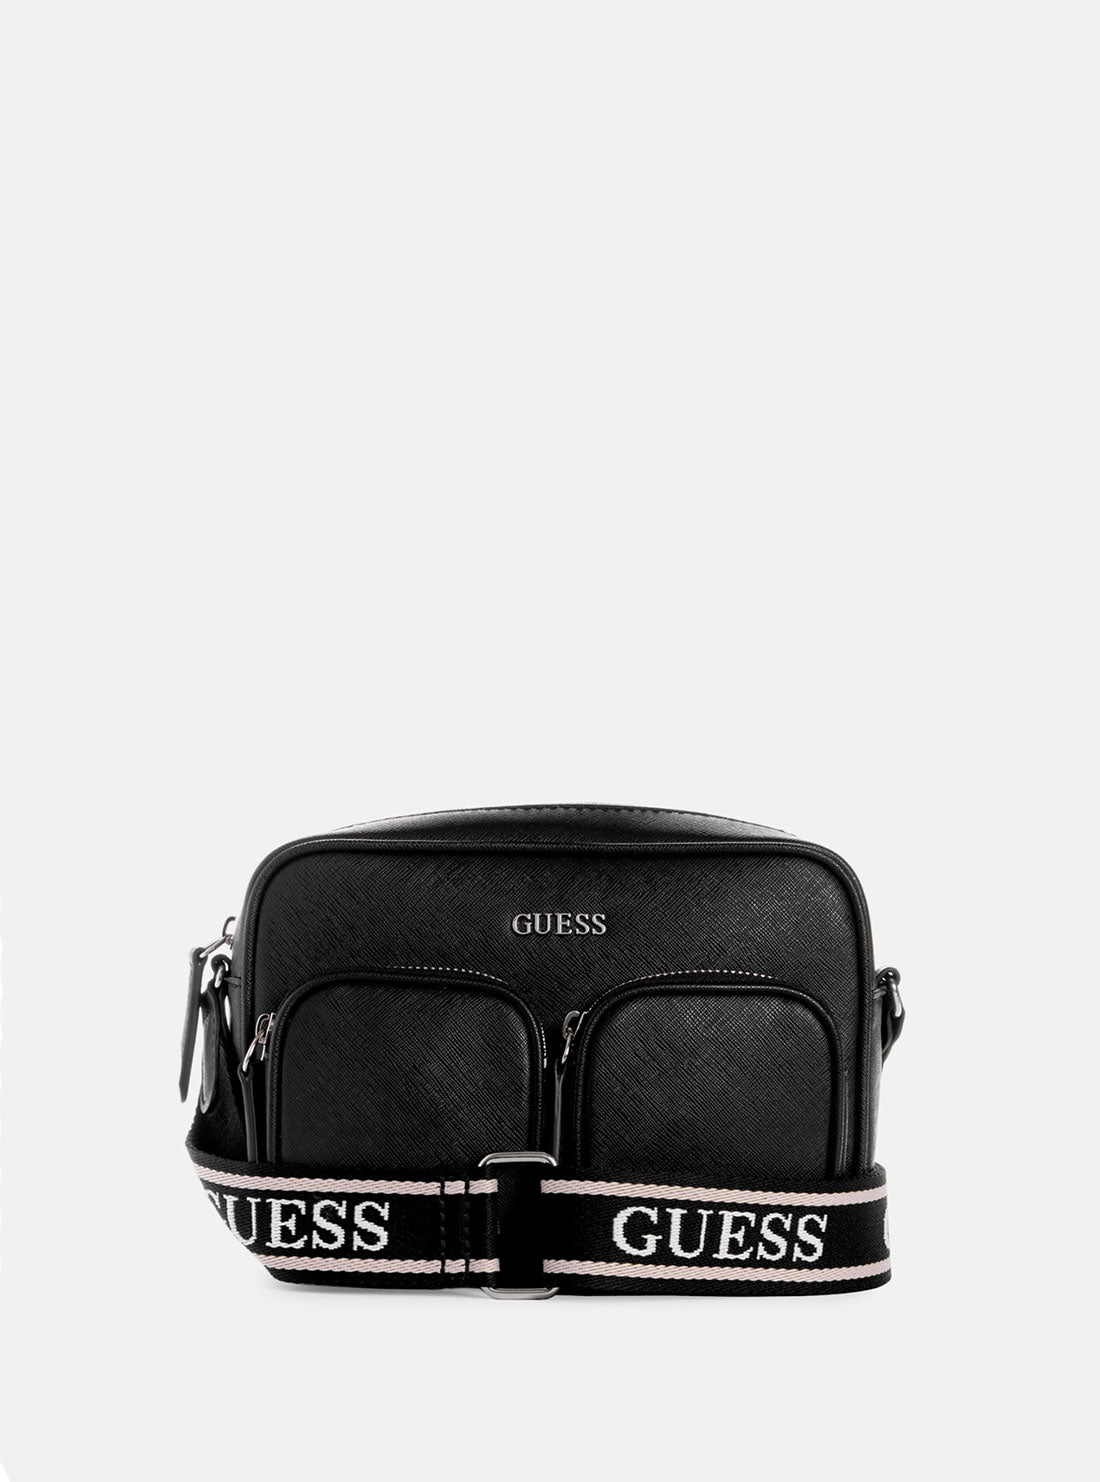 GUESS Black Pennywise Crossbody Bag front view